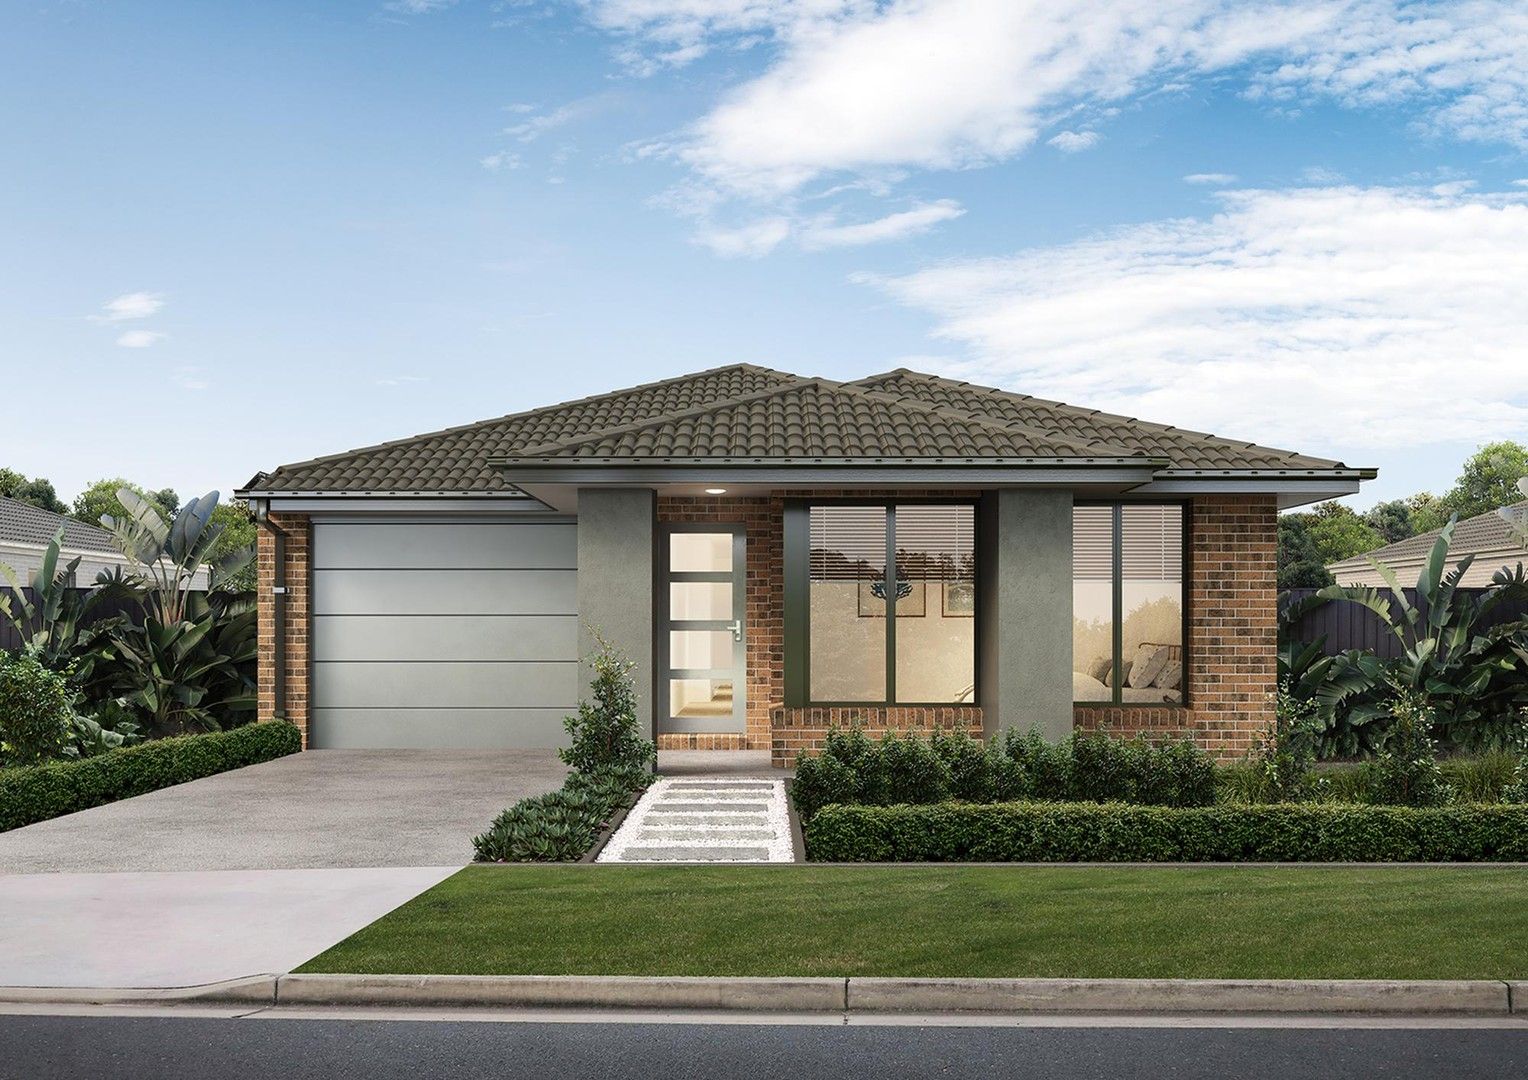 3 bedrooms New House & Land in 2701 Aspire Estate FRASER RISE VIC, 3336